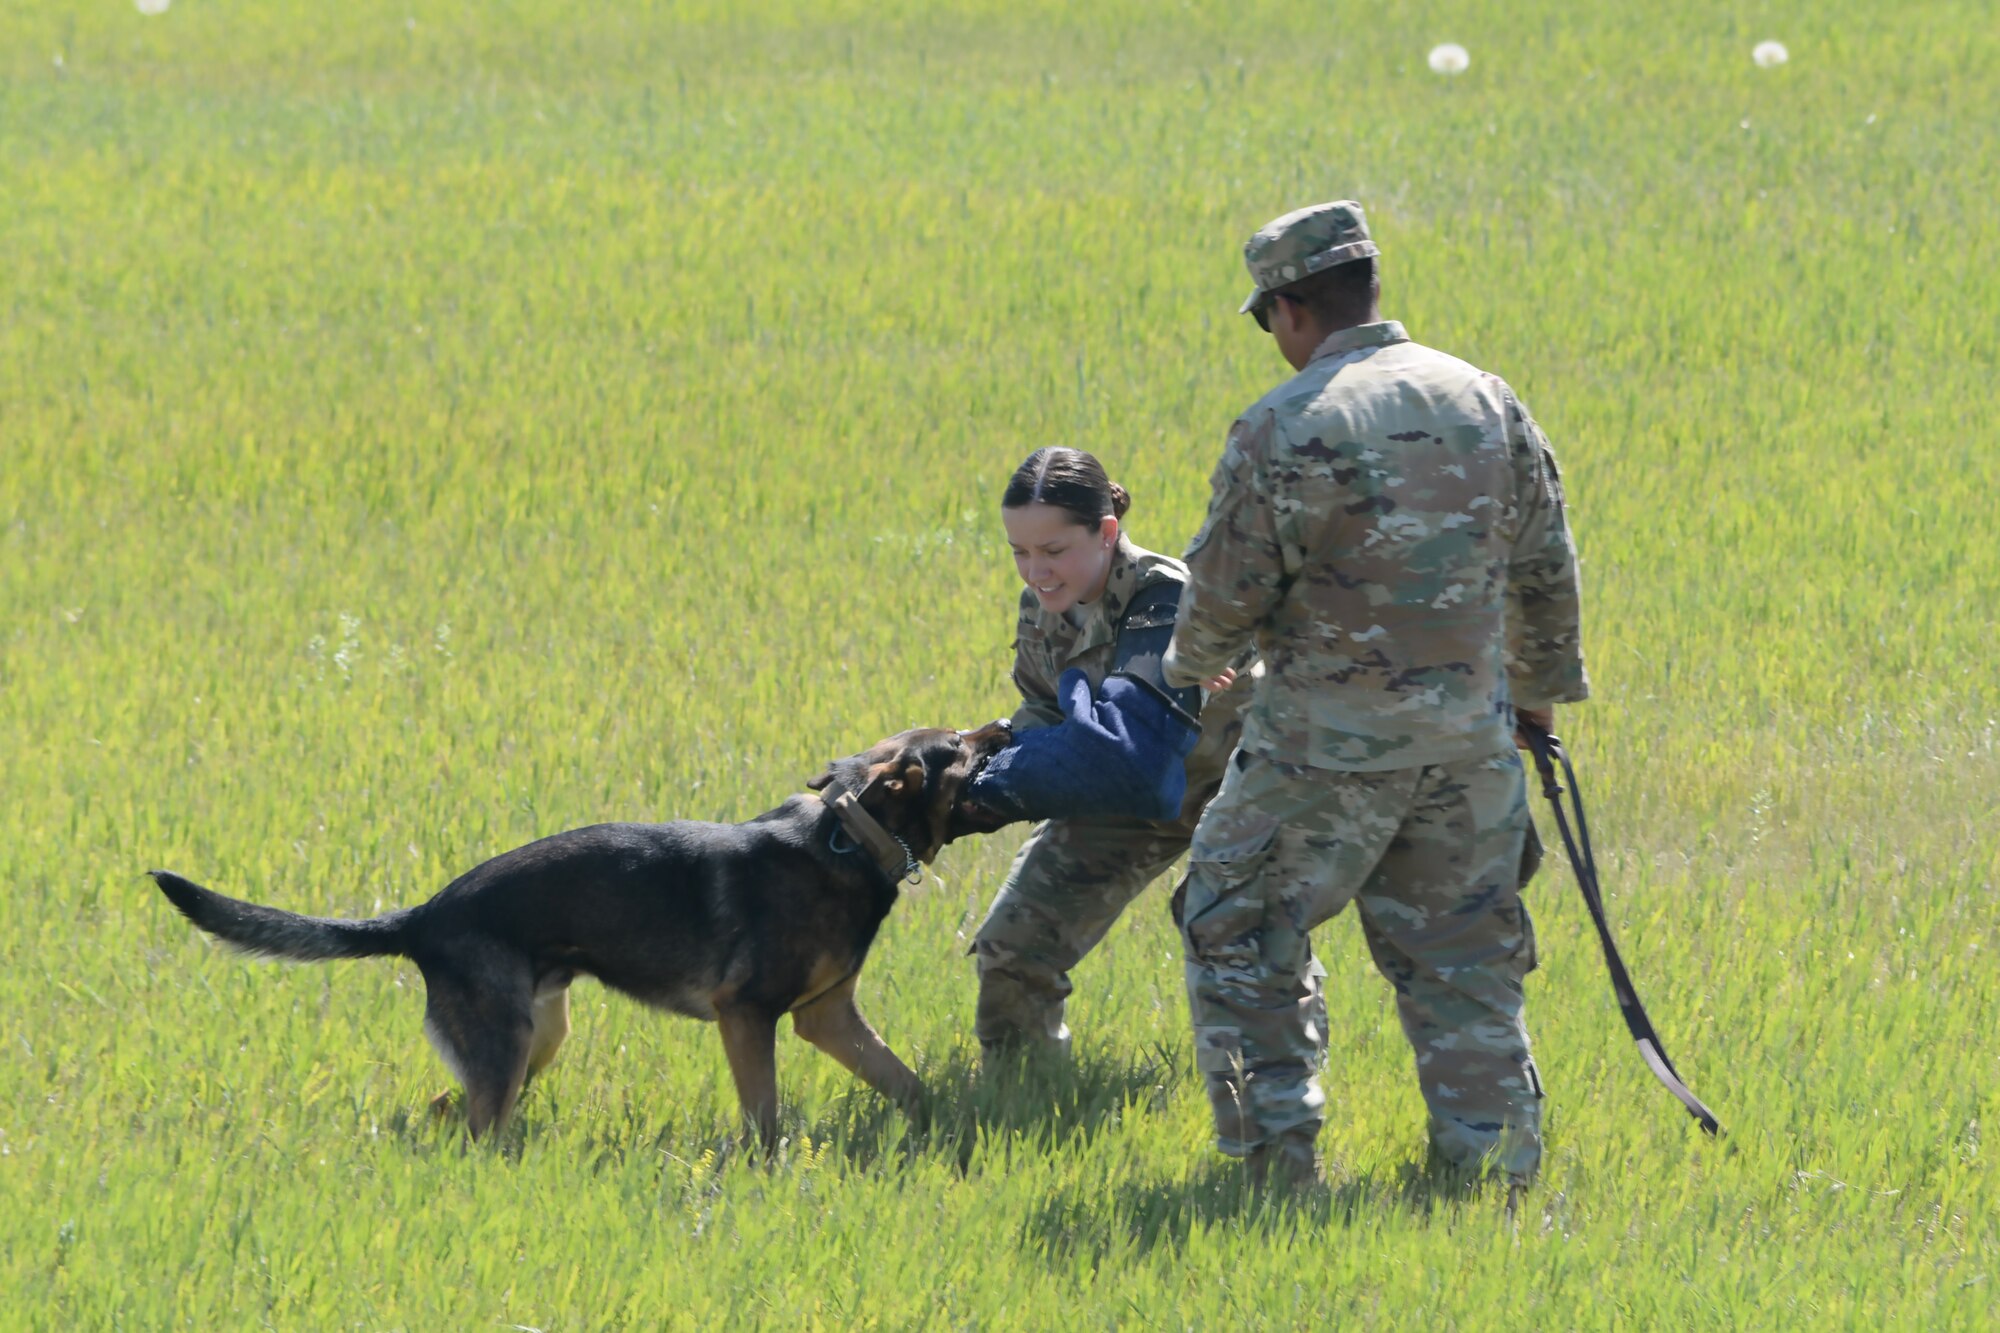 The 341st Security Forces Squadron perform a K-9 team demonstration July 13, 2019, at the “Mission Over Malmstrom” open house event on Malmstrom Air Force Base, Mont.